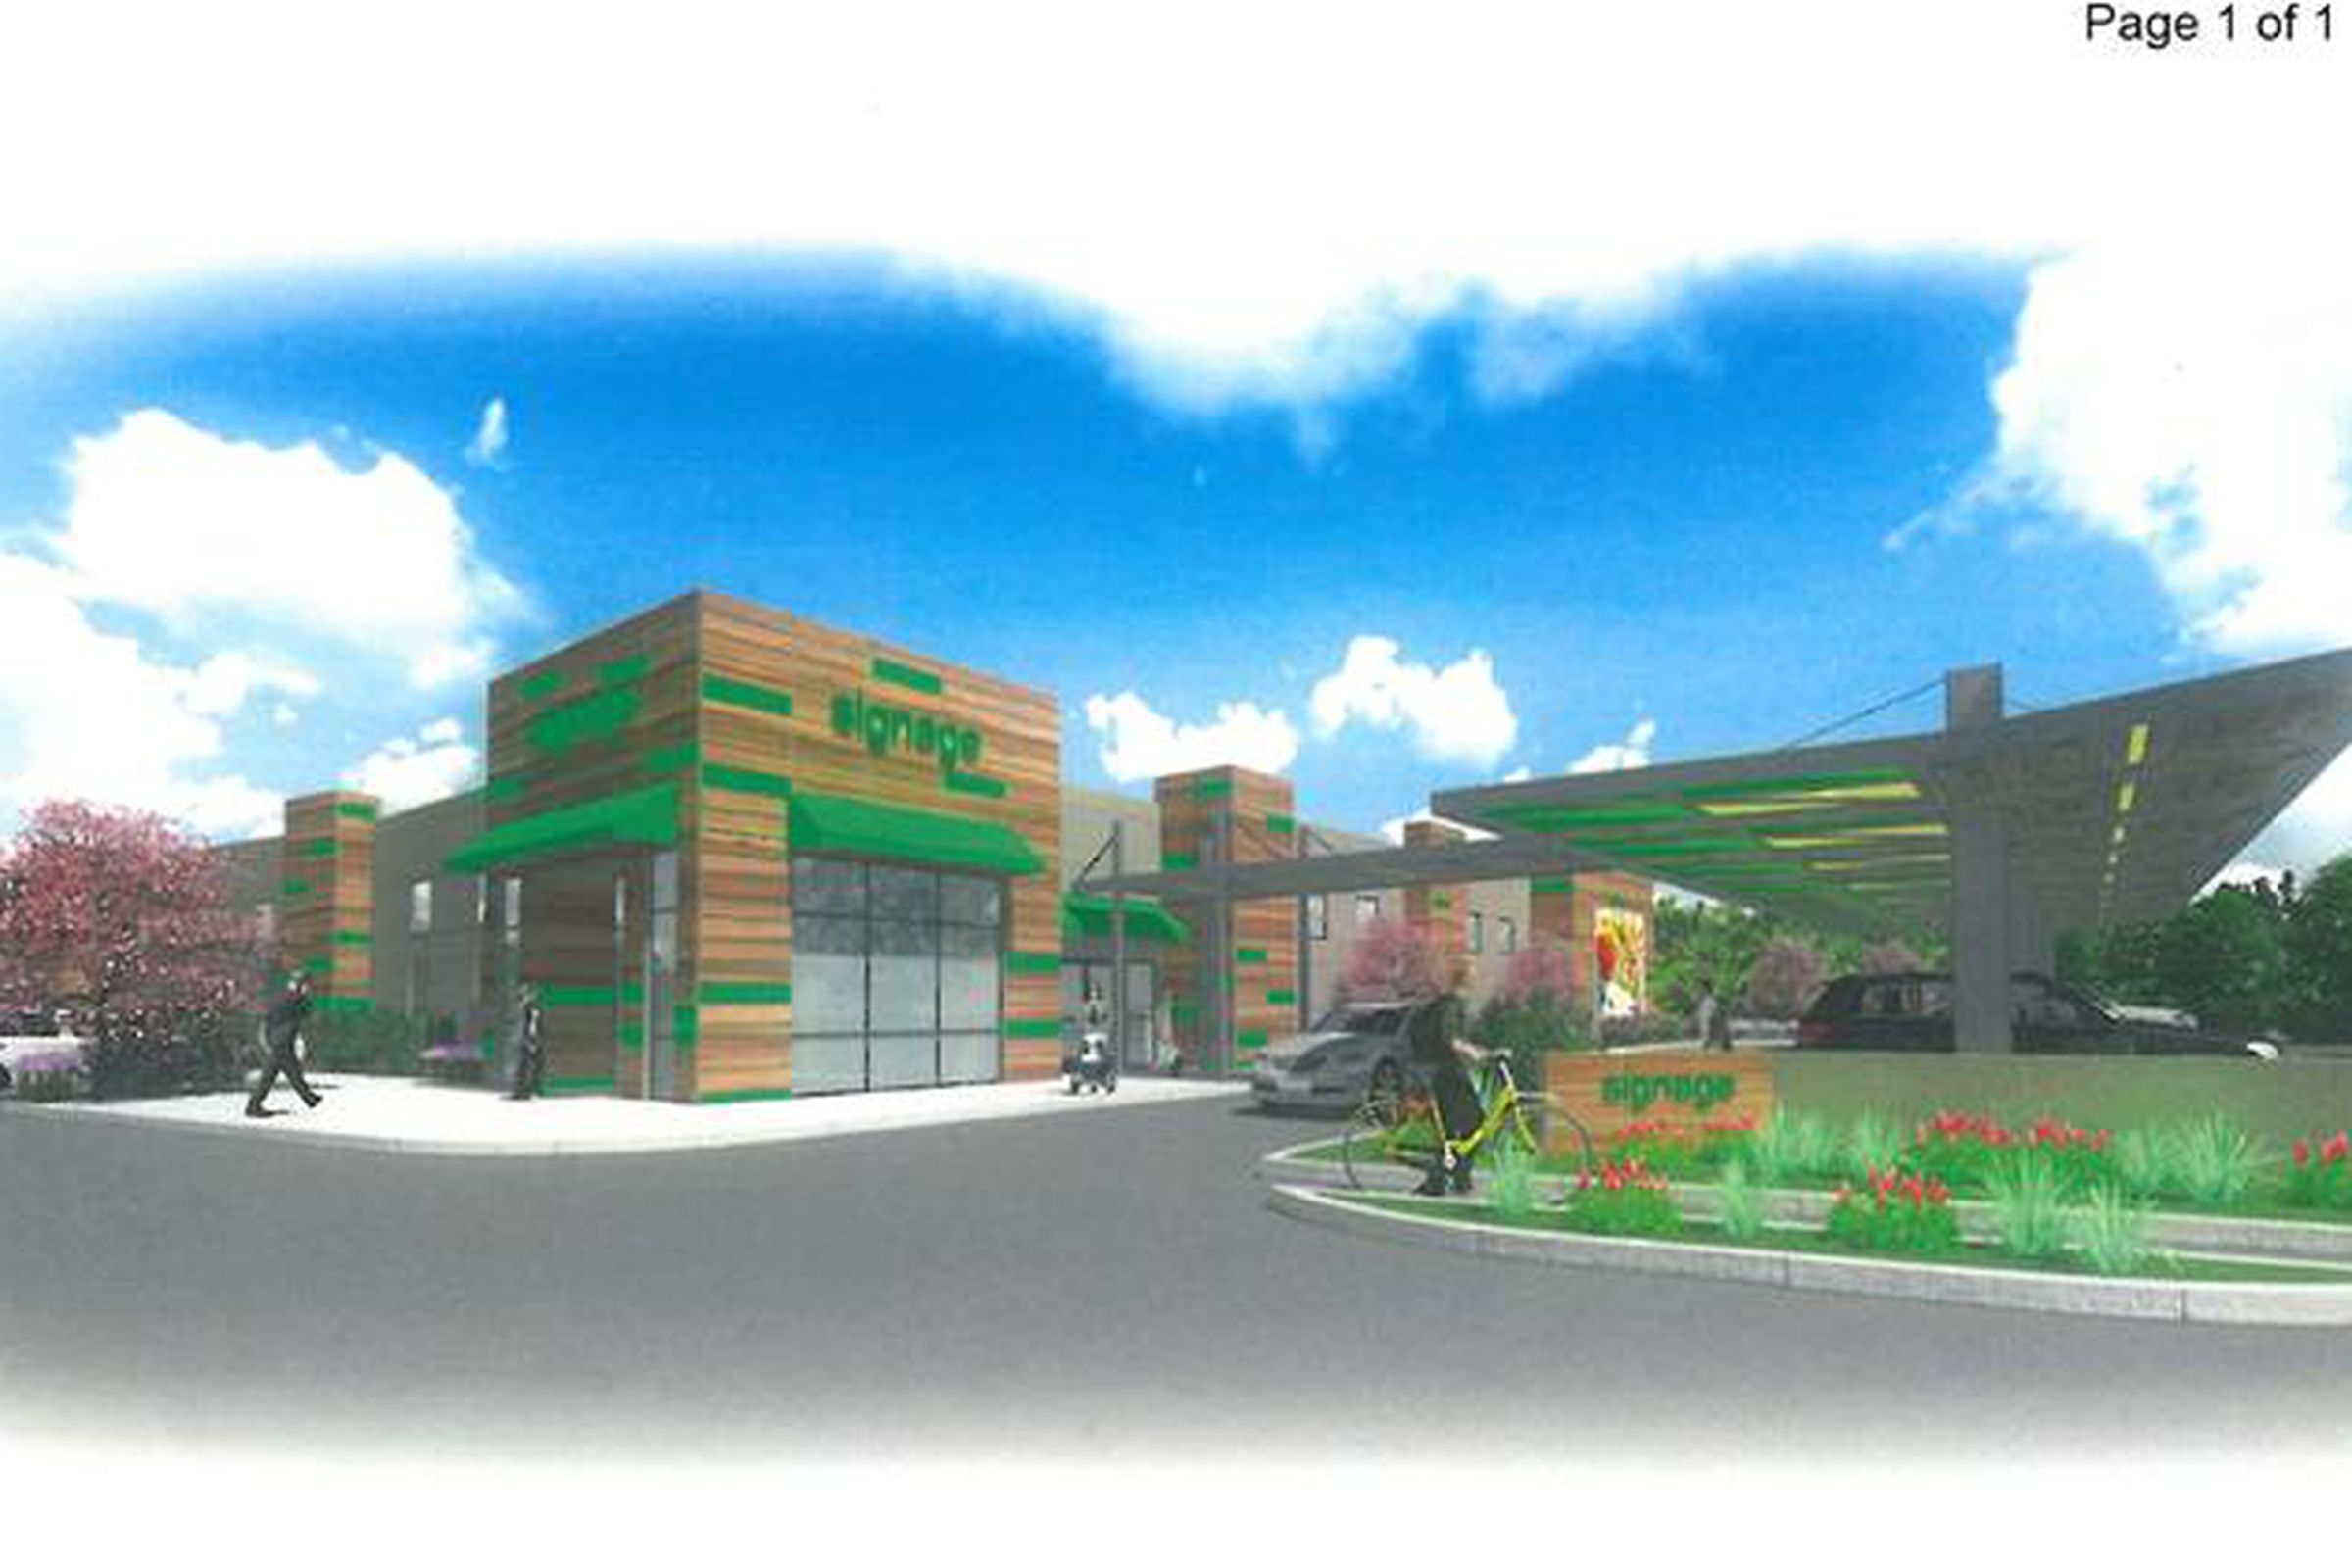 A rendering of the drive-thru grocery pickup concept submitted in planning documents (Business Journal). 